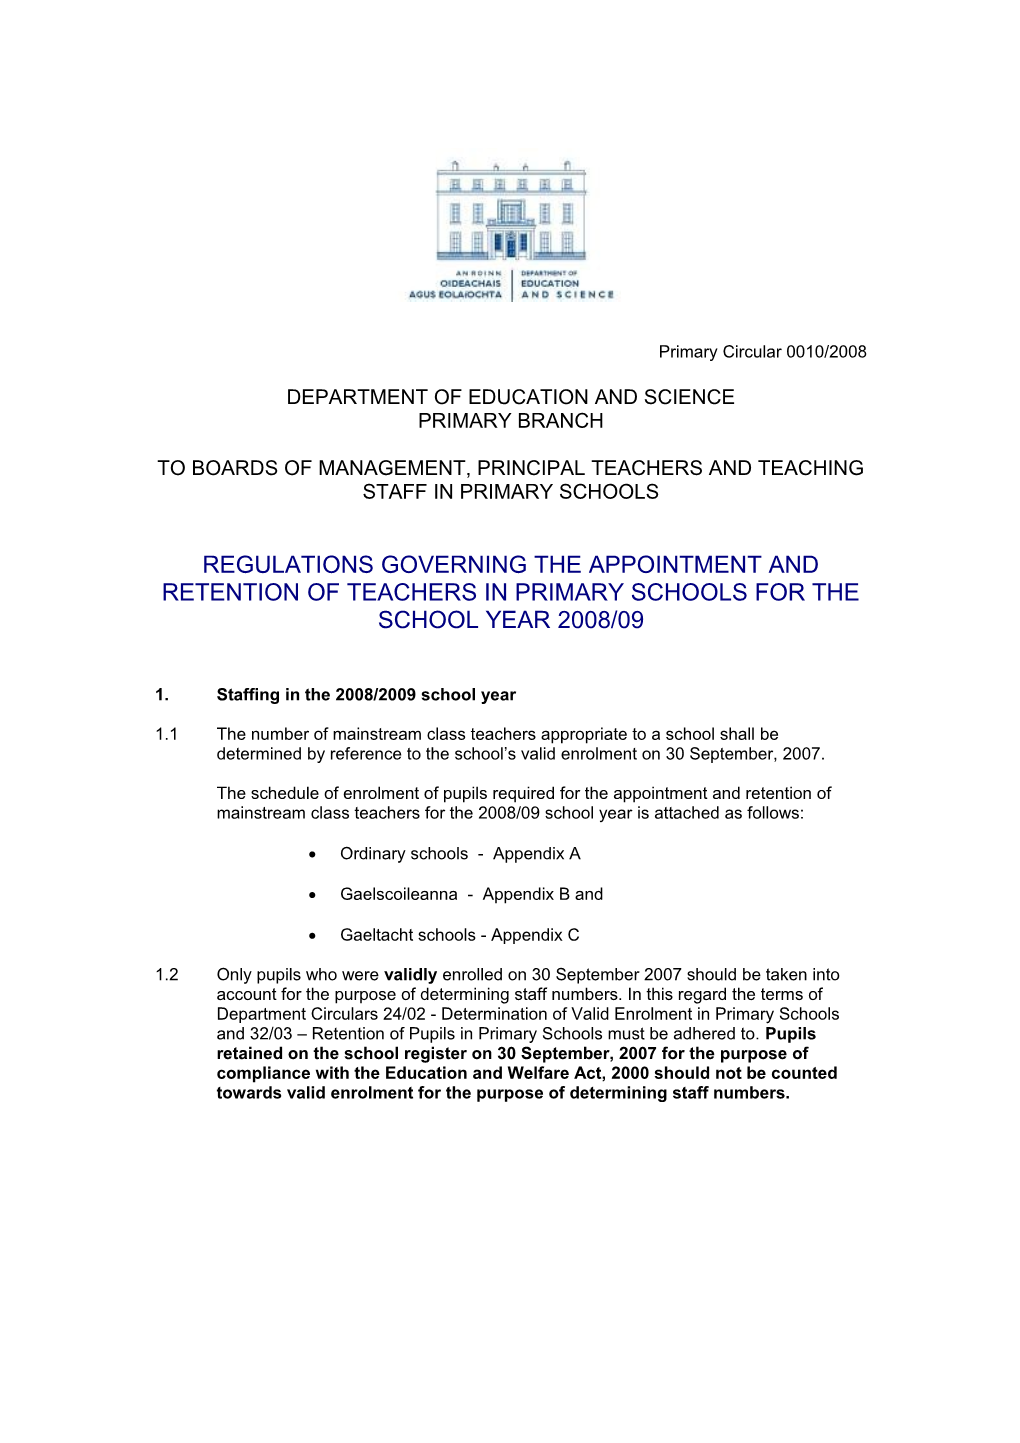 Circular 0010/2008 - Regulations Governing the Appointment and Retention of Teachers In